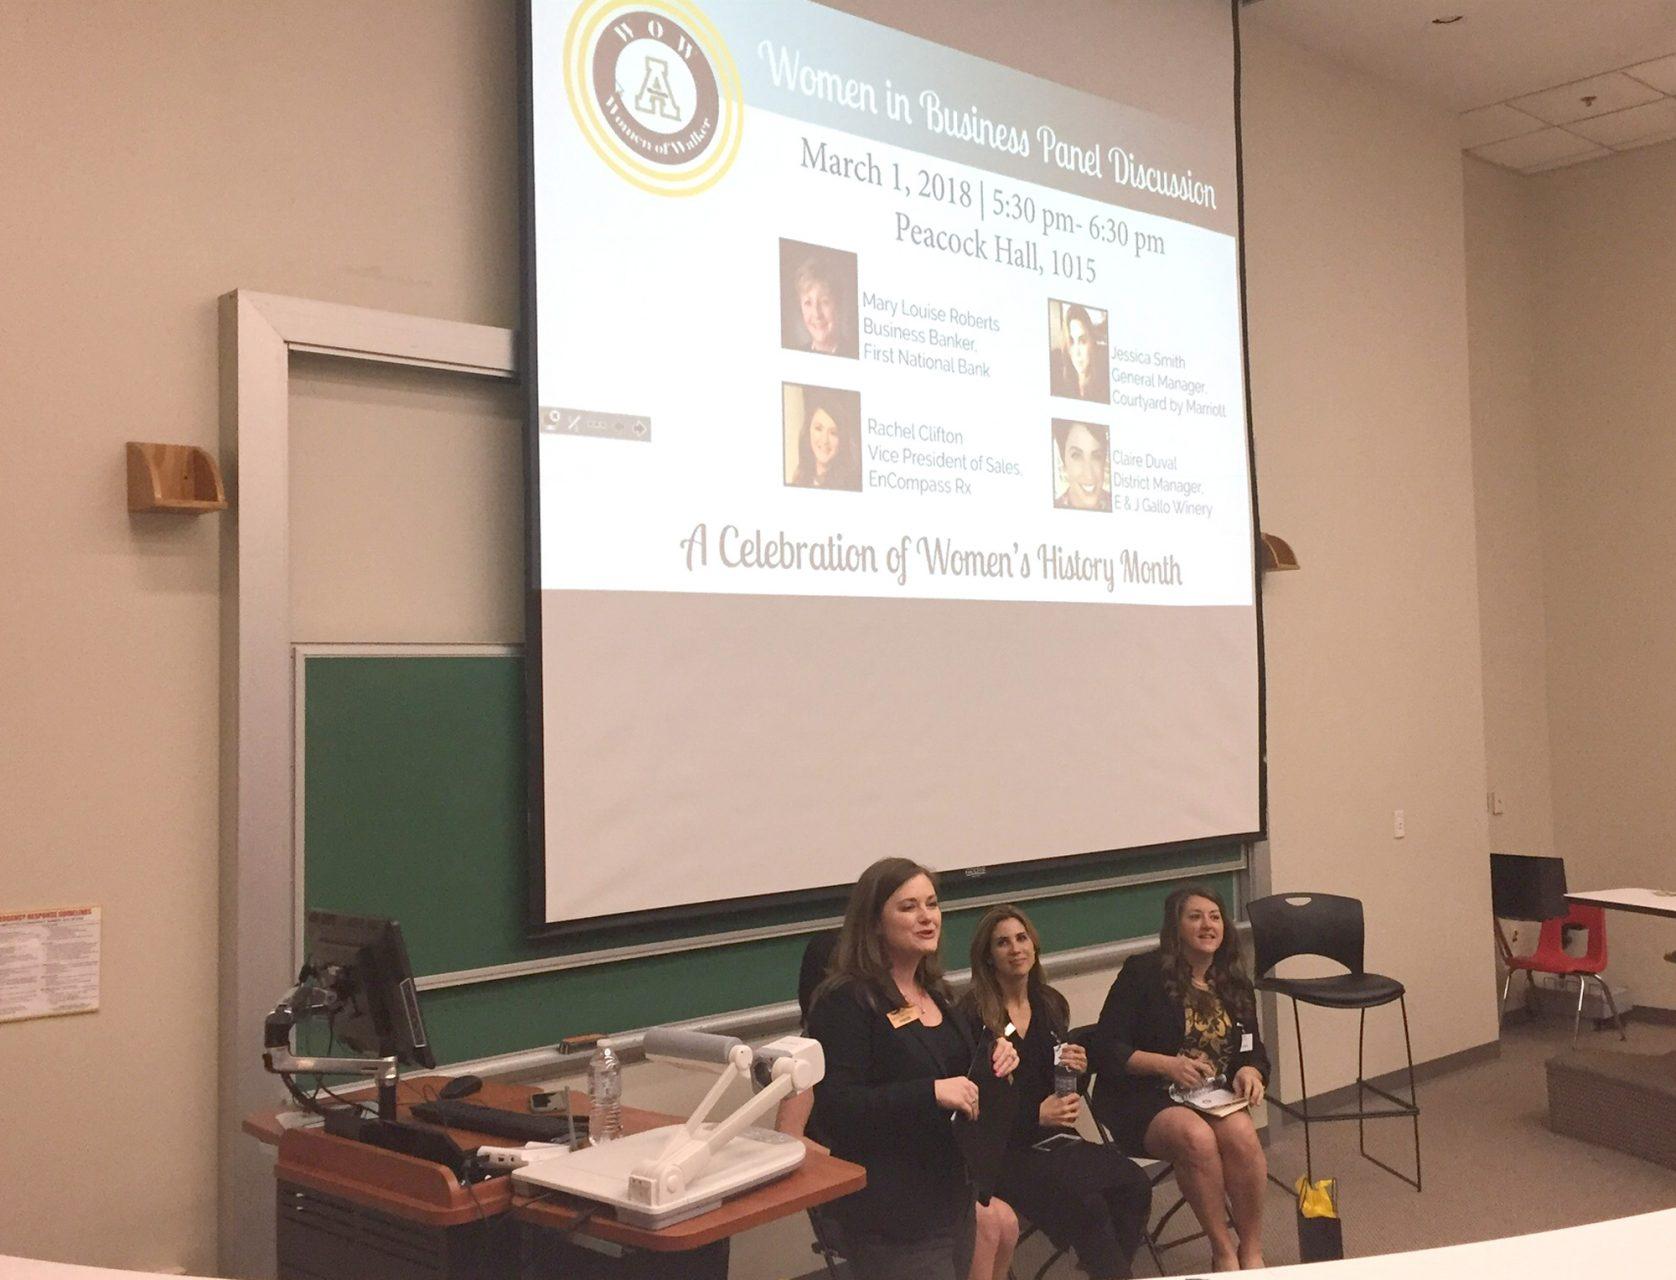 The Women of Walker’s “Women in Business” panel discussion too place in Kenneth E. Peacock Hall, room 1015